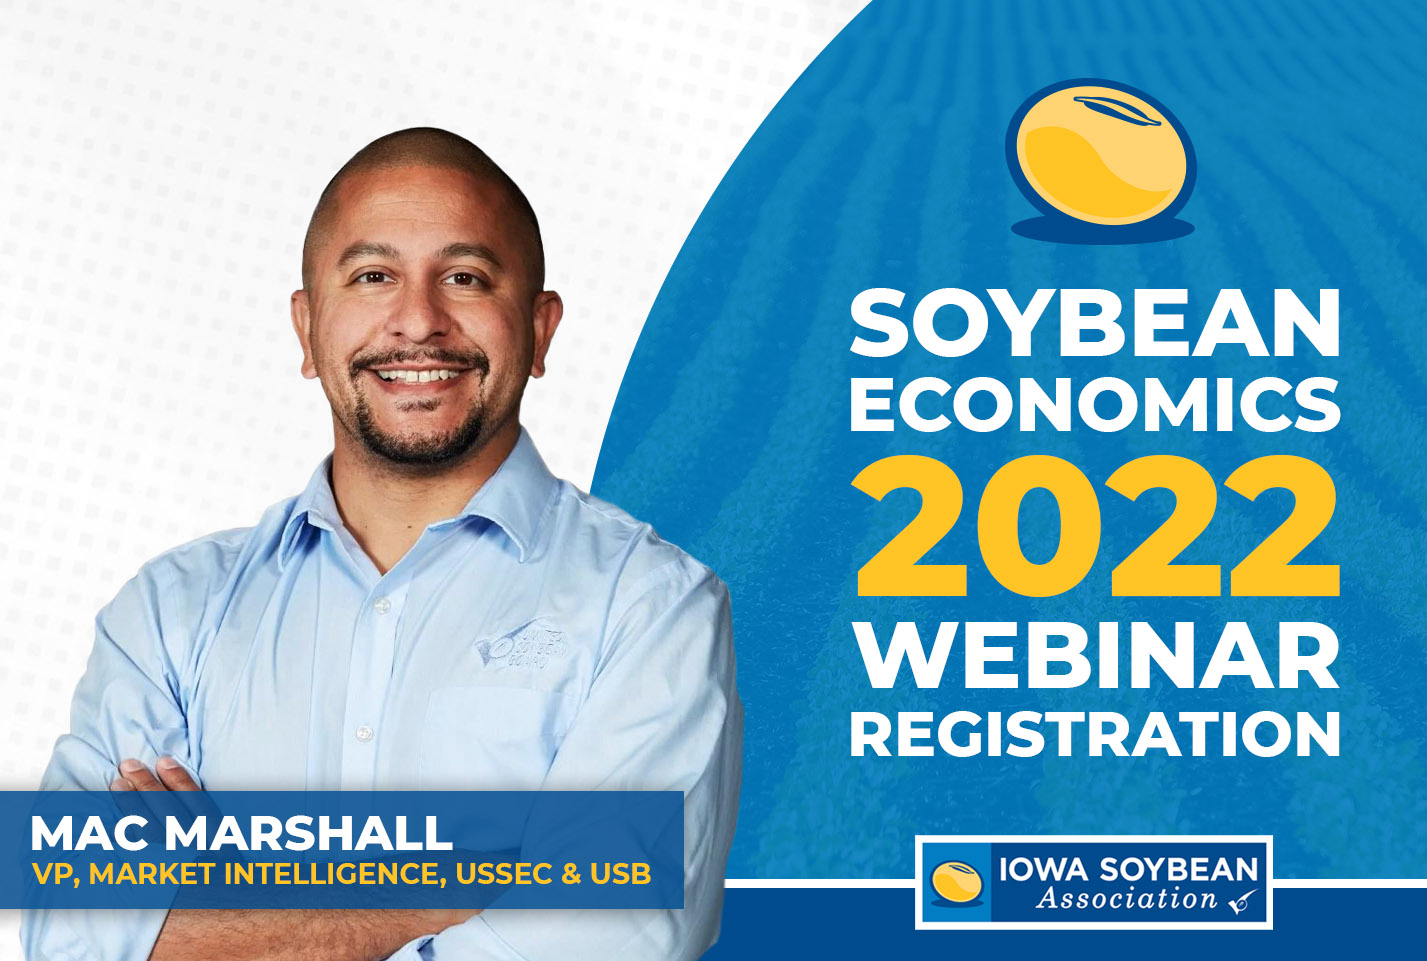 Webinar about soybeans featuring Mac Marshall